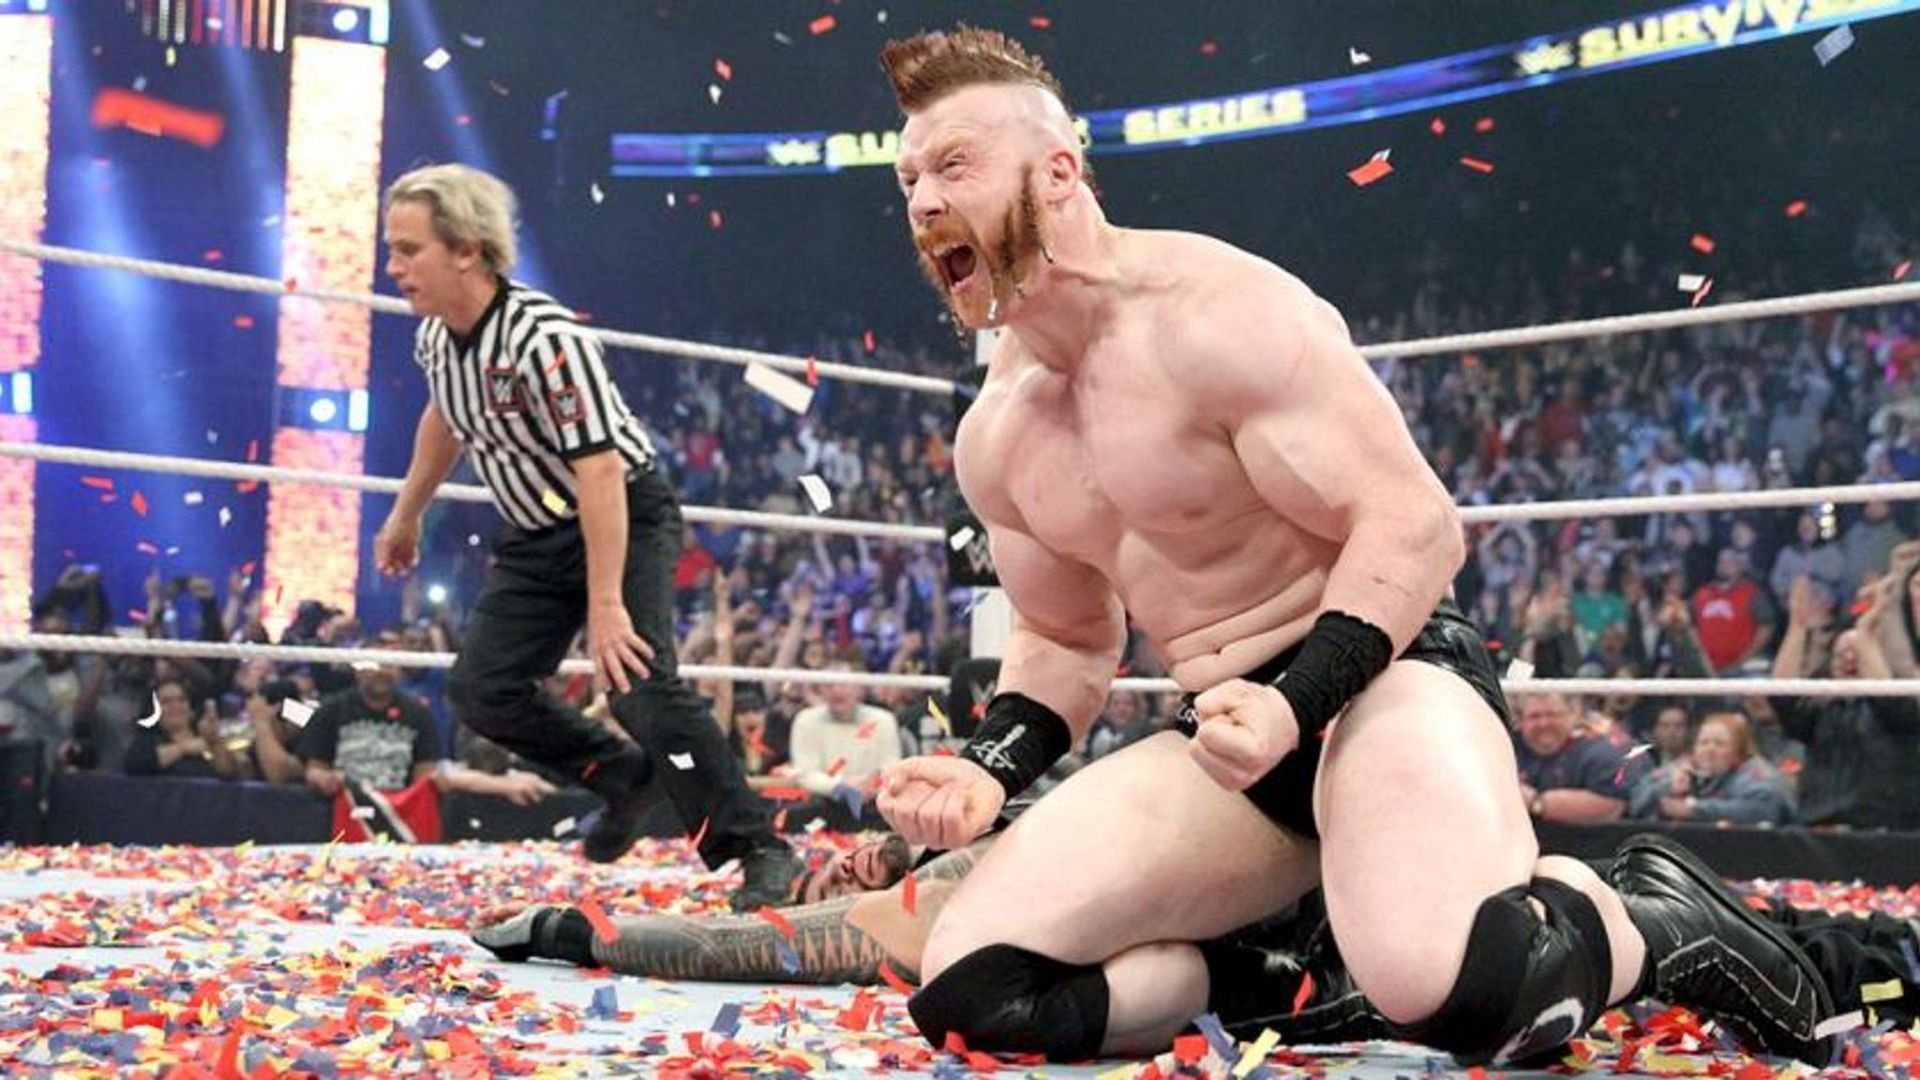 Sheamus and Roman Reigns have quite a history at WWE Survivor Series.